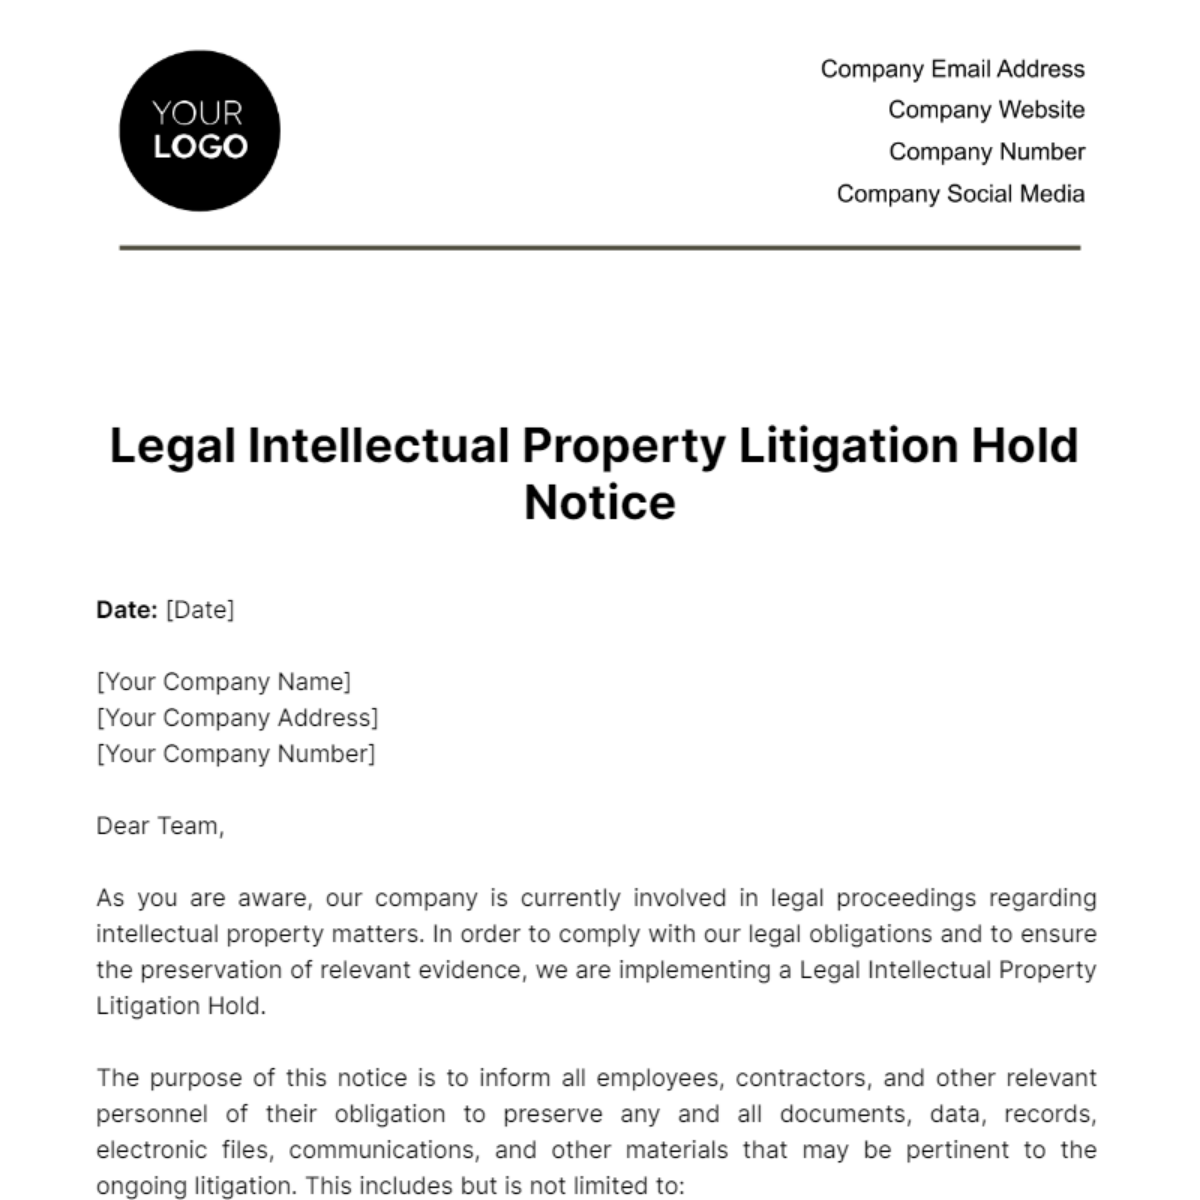 Free Legal Intellectual Property Litigation Hold Notice Template